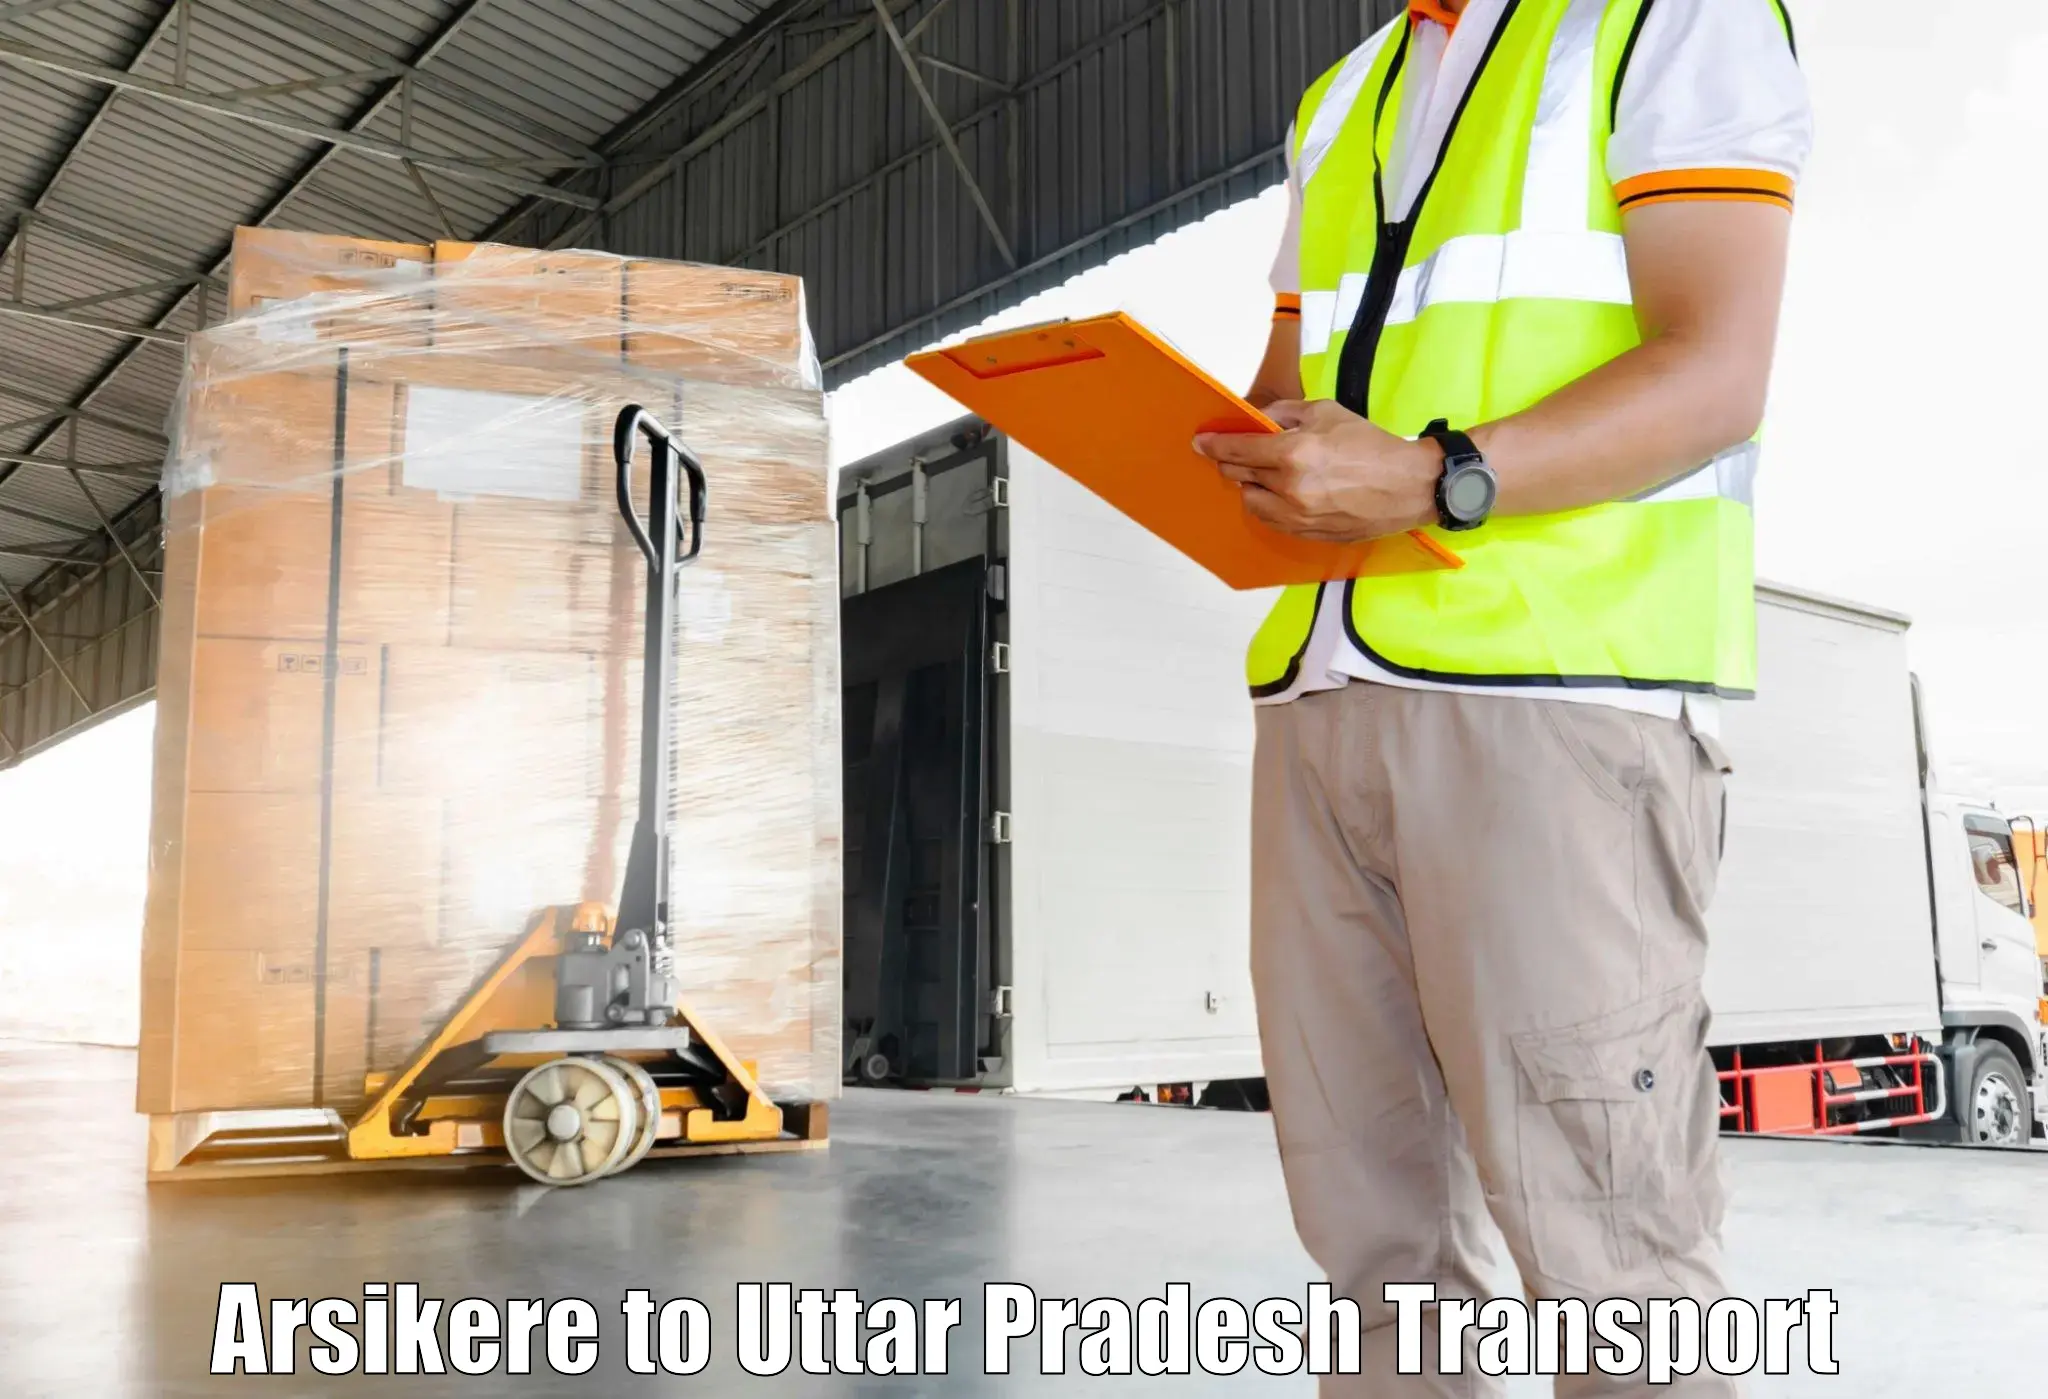 Road transport services Arsikere to Moradabad